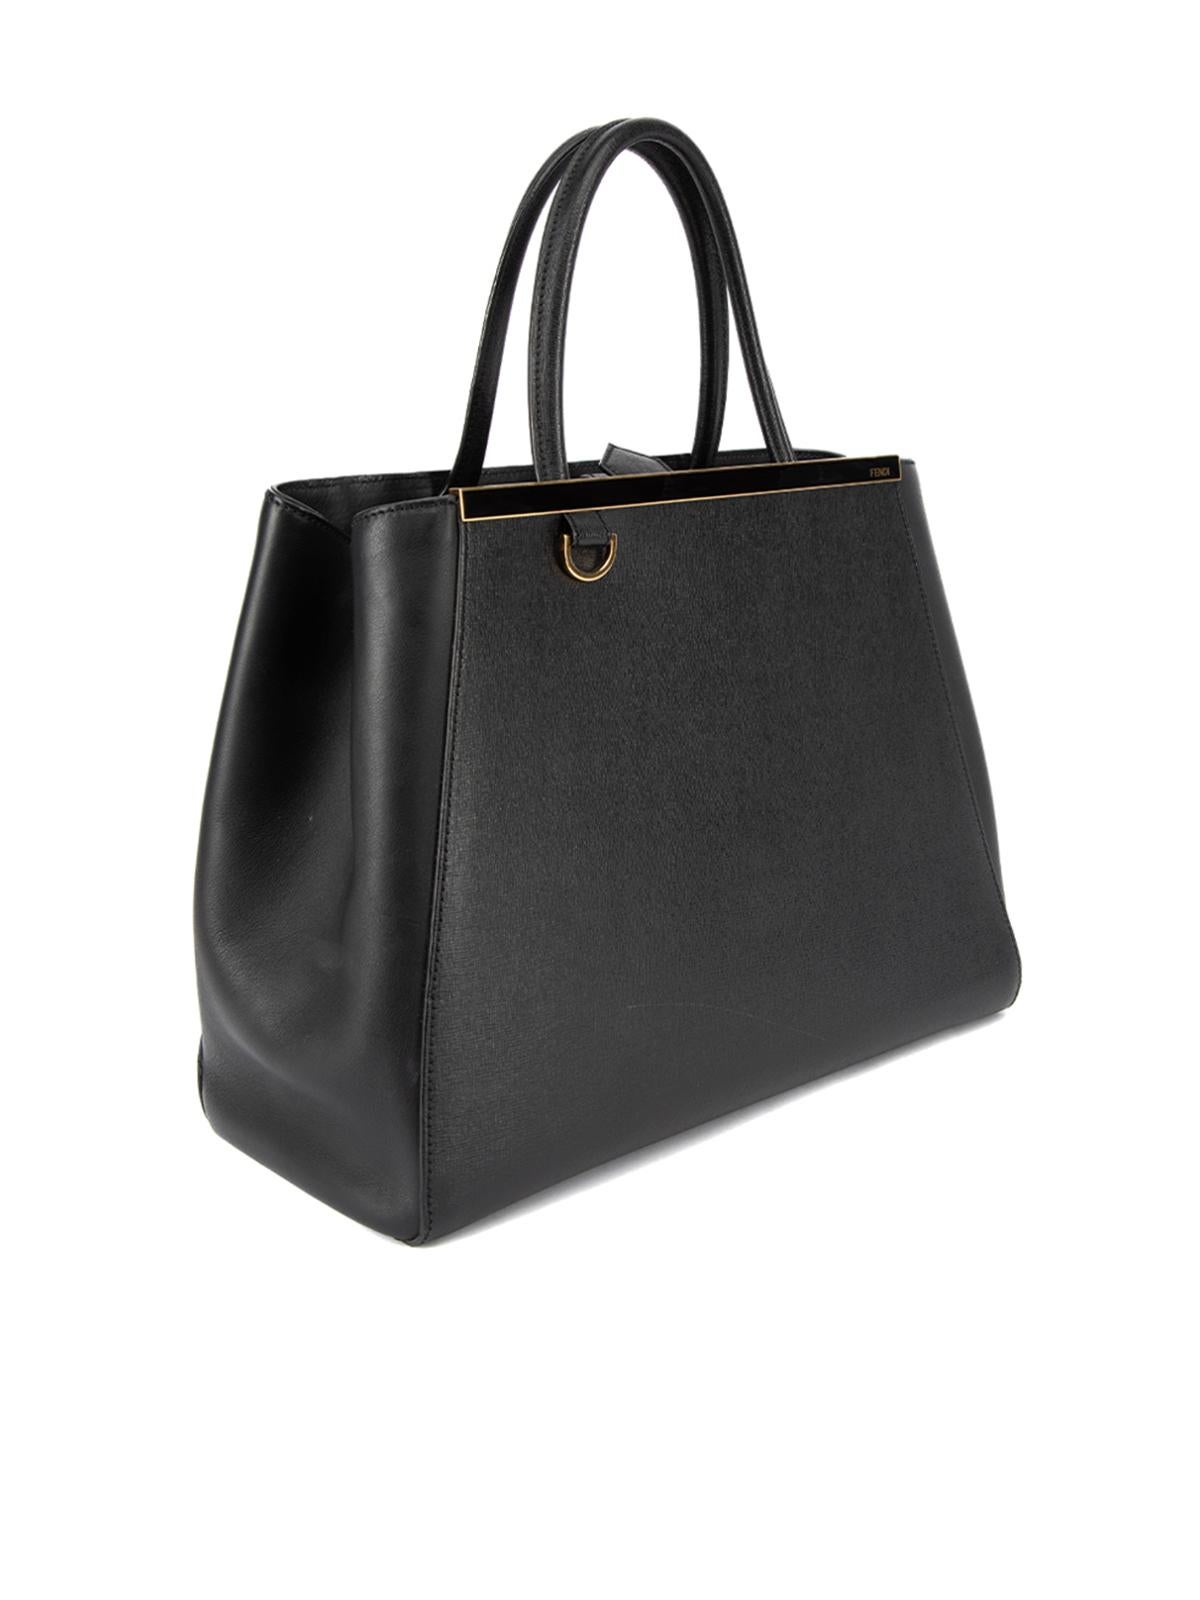 CONDITION is Very good. Minimal wear to bag is evident. Minimal wear to the bag interior from general use, and there is a visble scratch to the leather exterior on this used Fendi designer resale item. Details Black Leather Tote bag 2x Rounded top